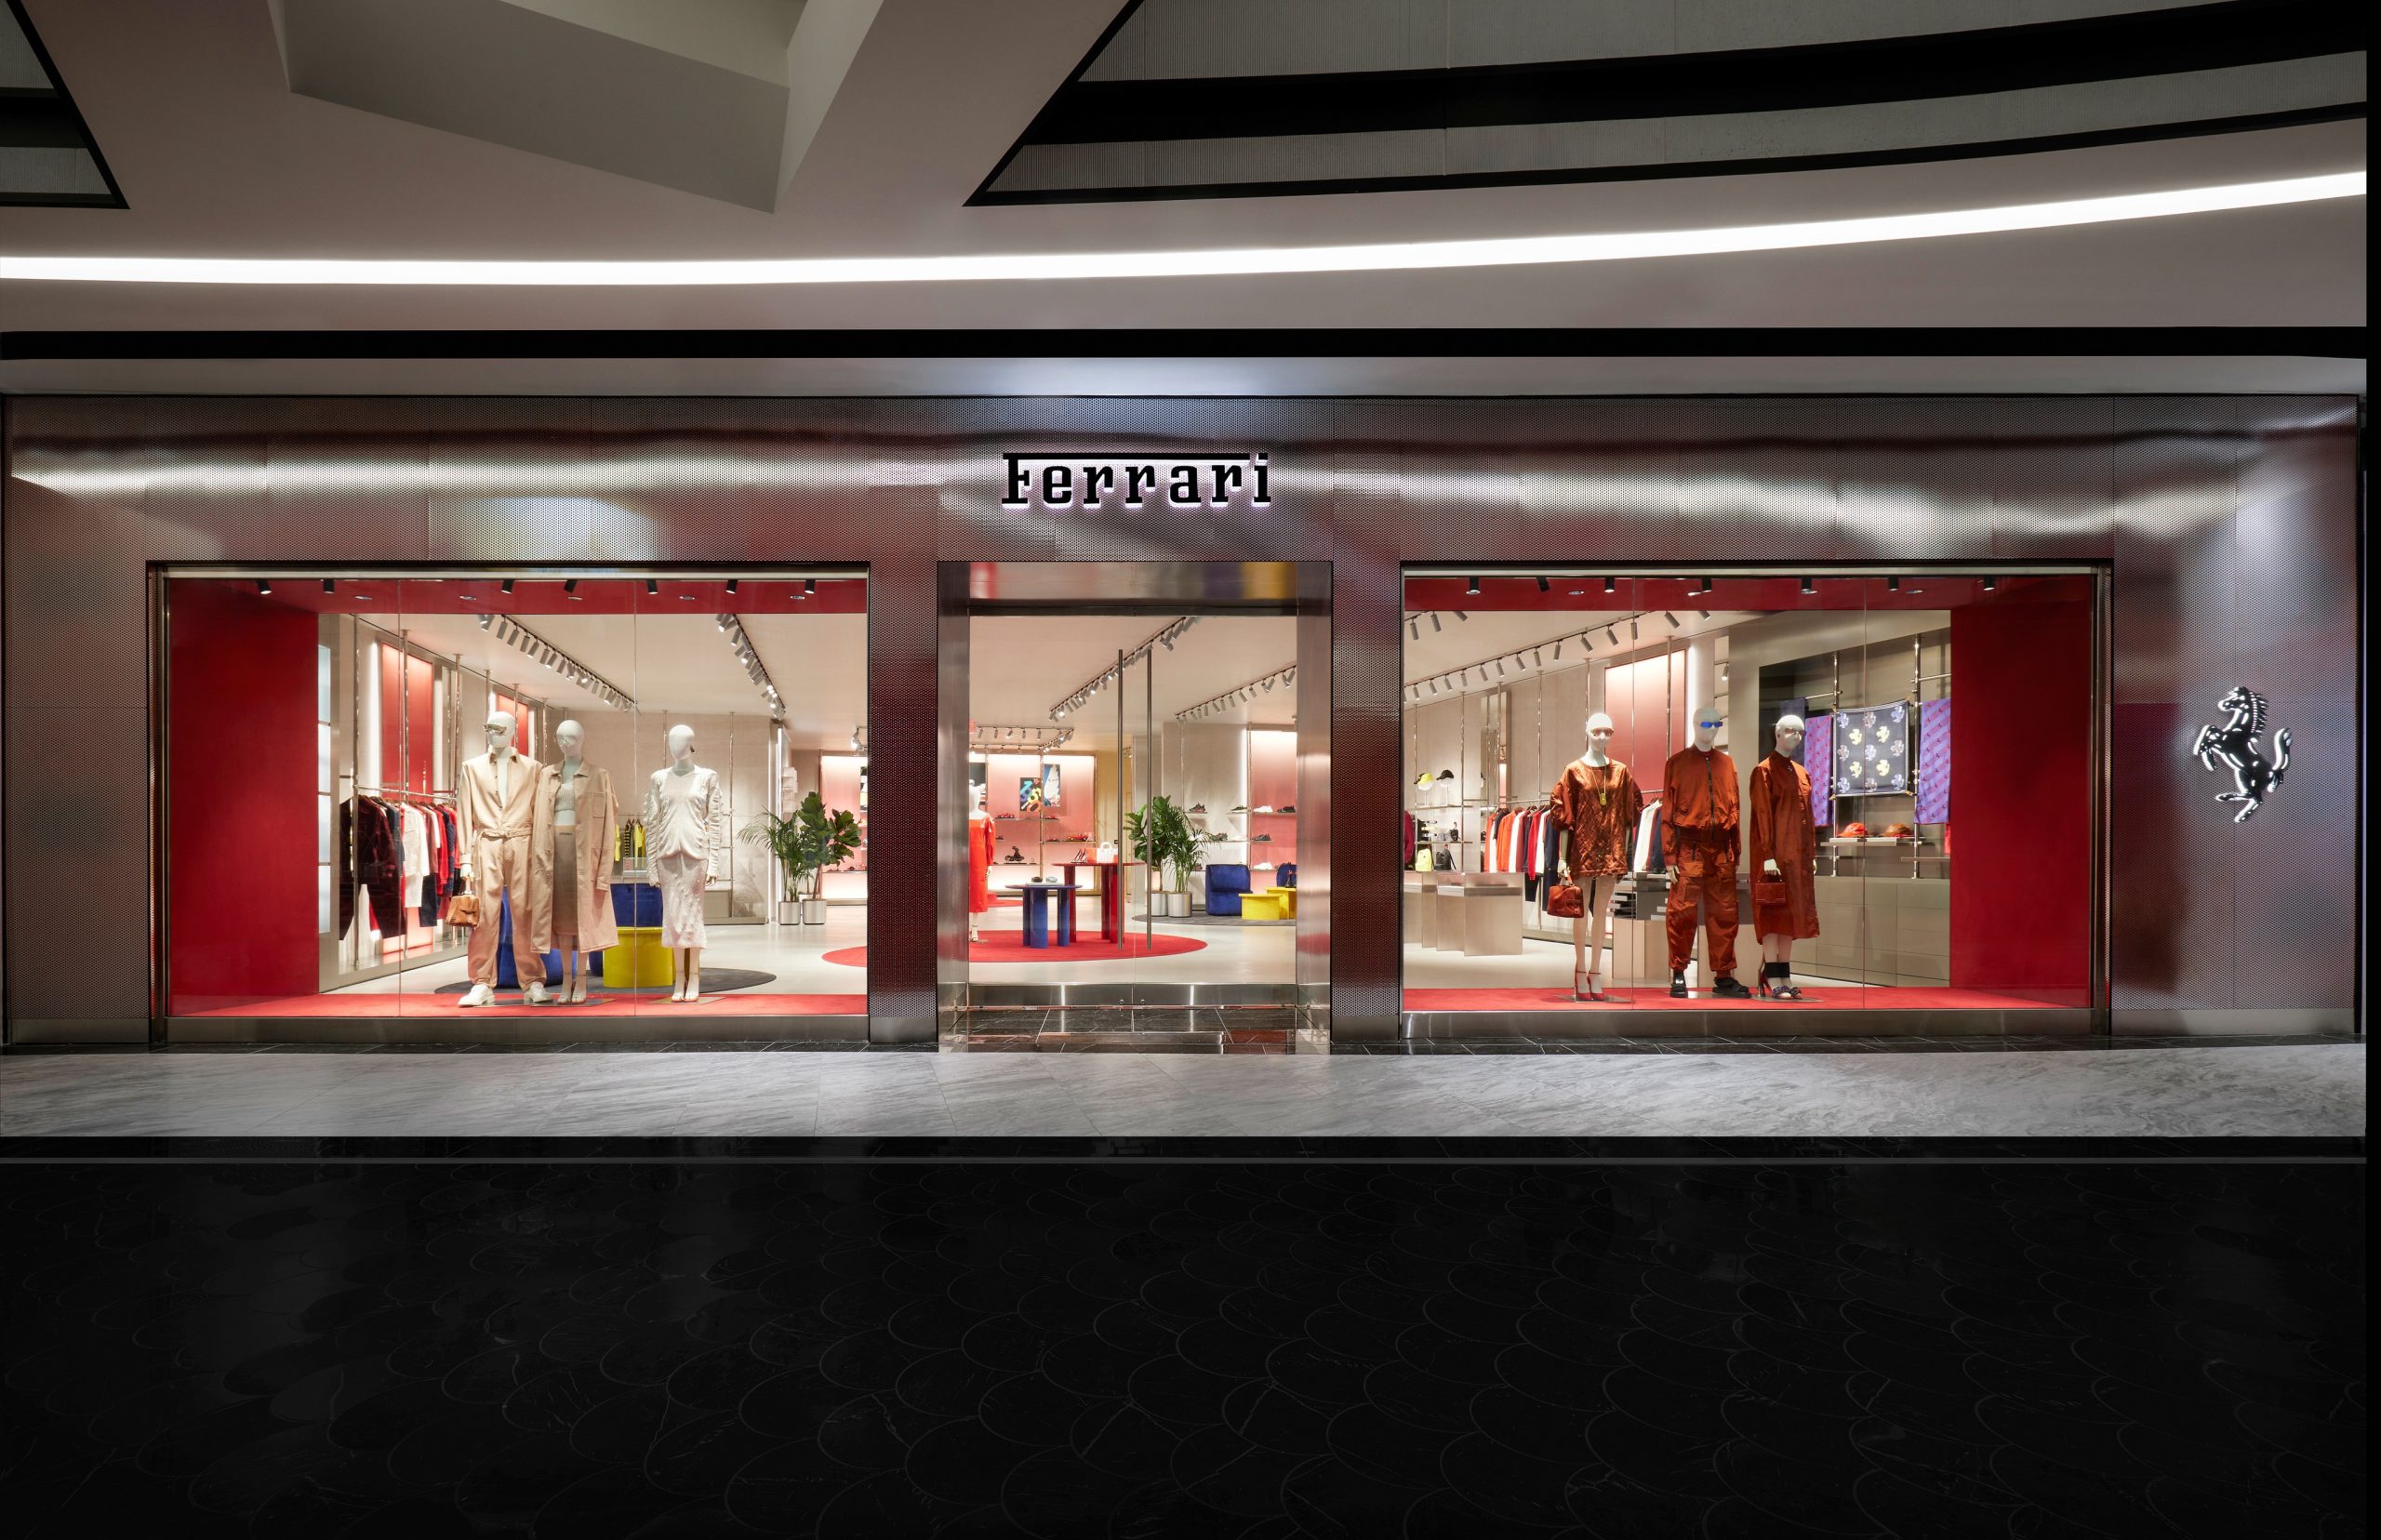 FERRARI OPENS NEW FASHION AND LIFESTYLE BOUTIQUE AT AMERICAN DREAM, DEBUTING REIMAGINED RETAIL CONCEPT